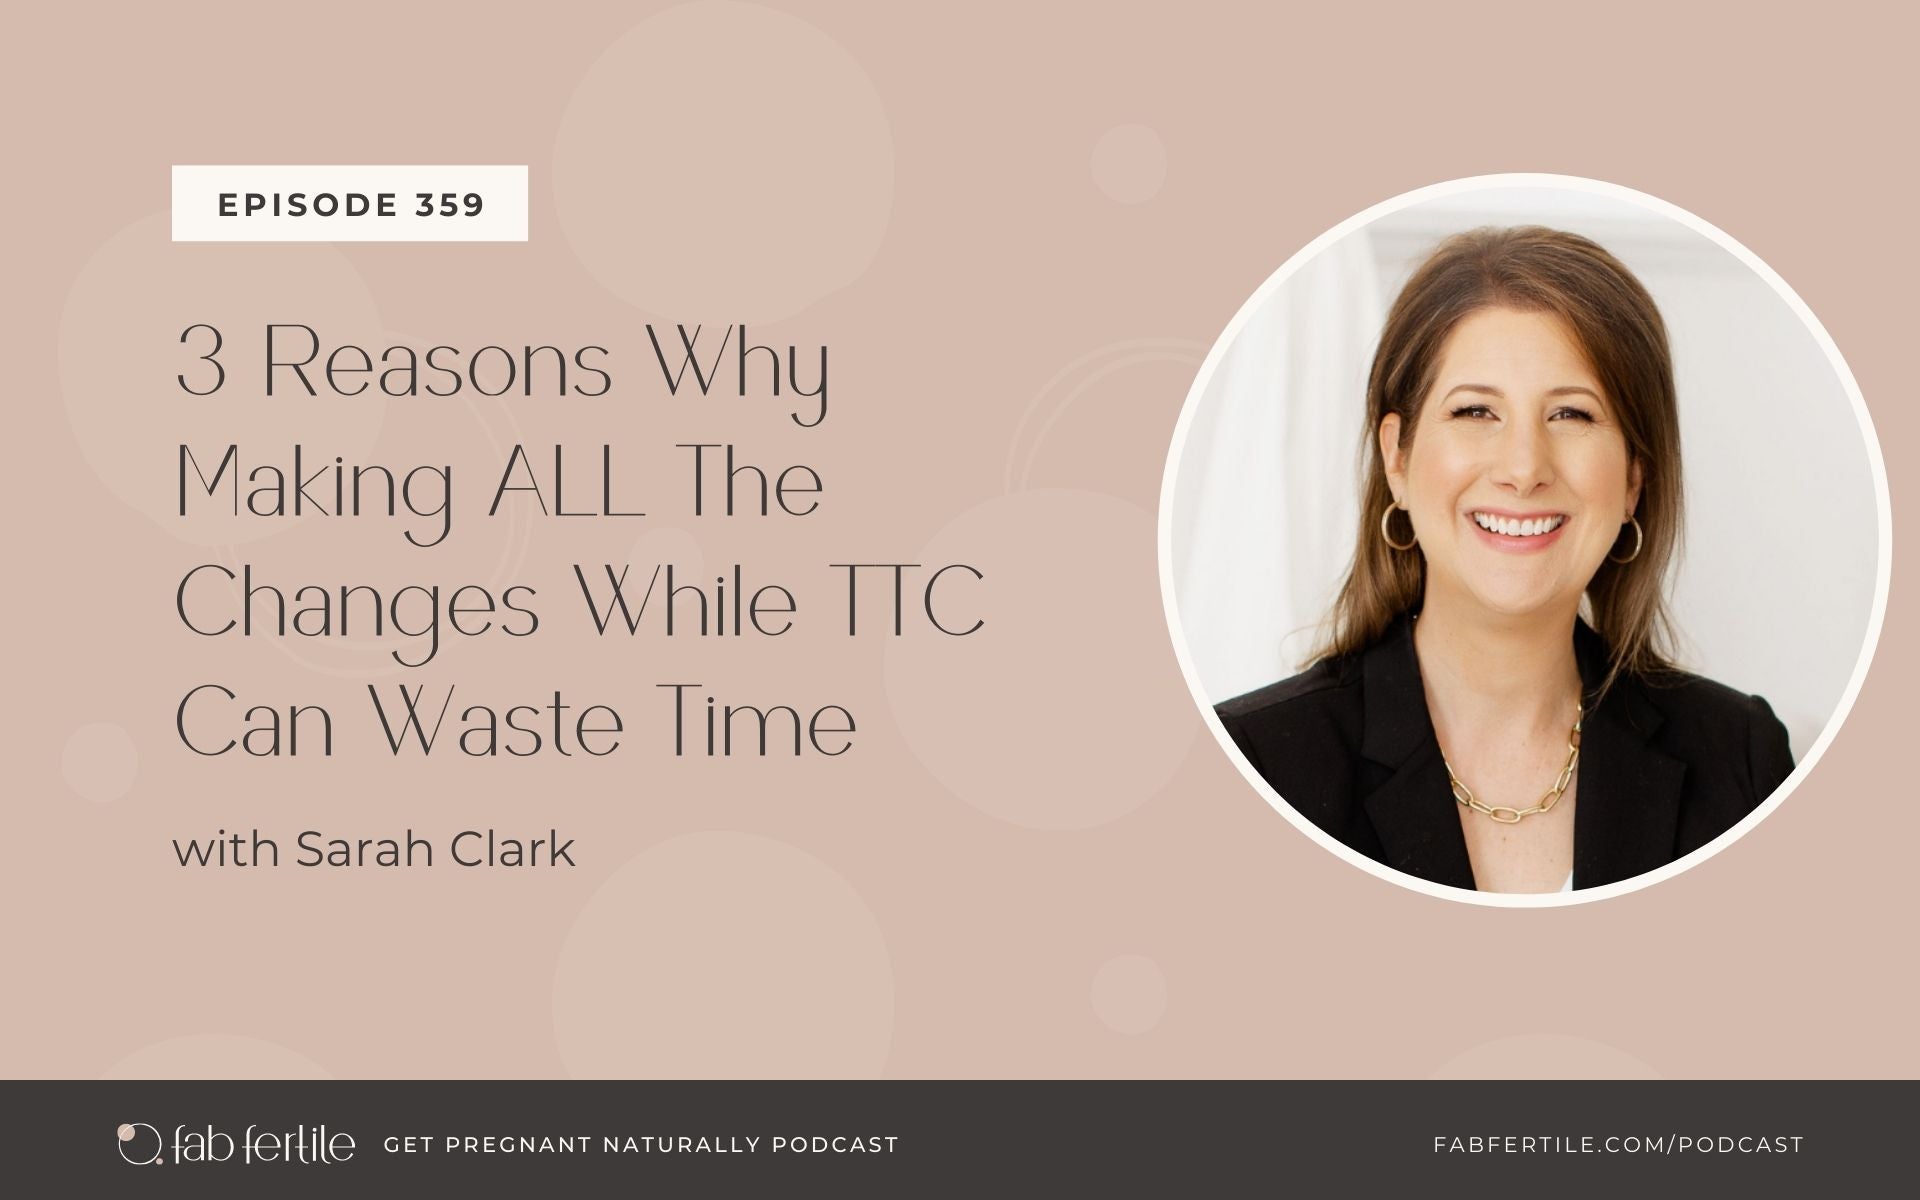 3 Reasons Why Making ALL The Changes While TTC Can Waste Time